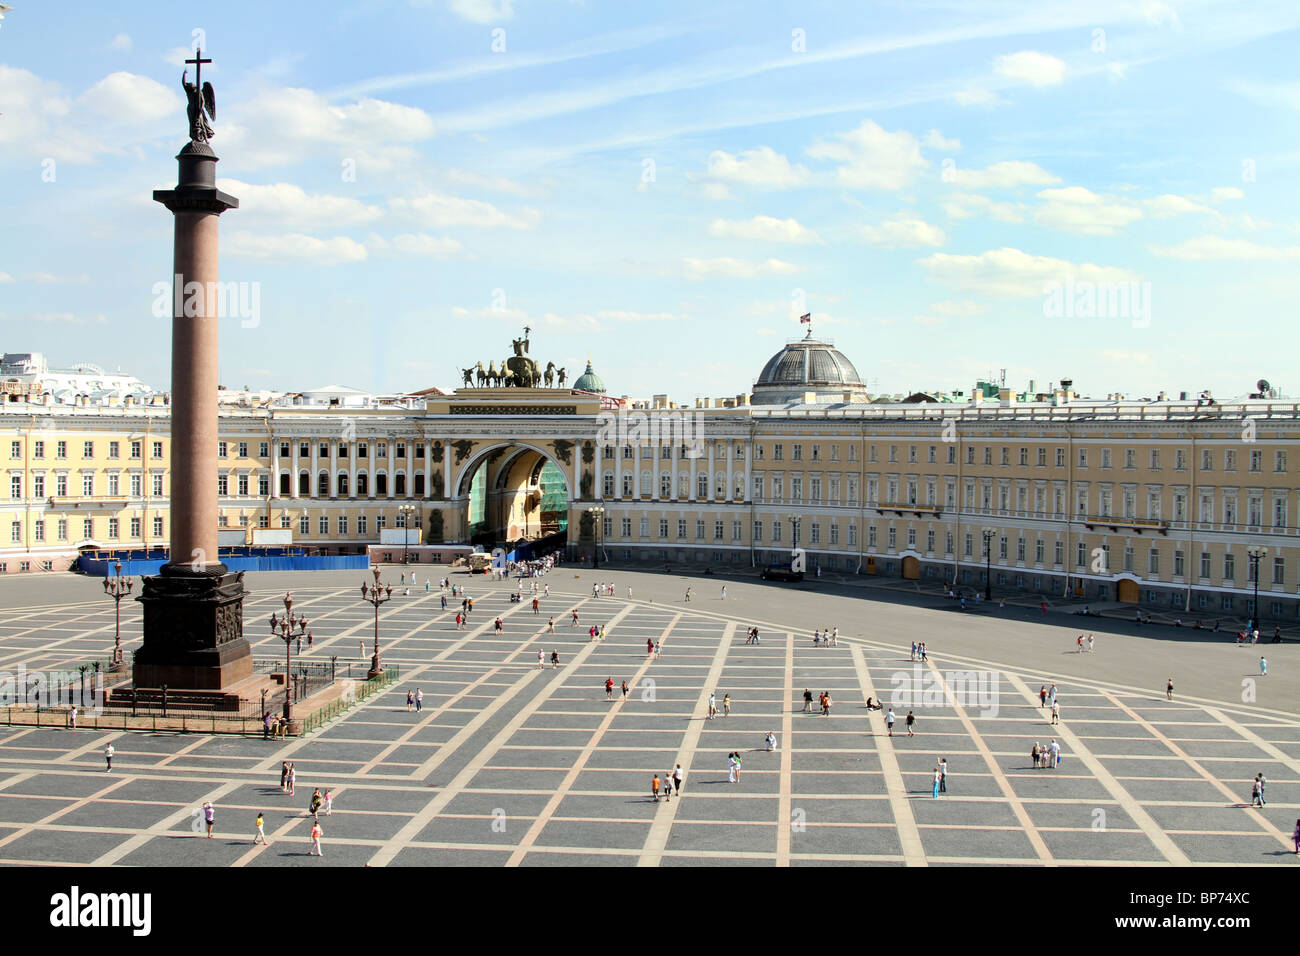 The Alexander Column in Palace Square in St. Petersburg, Russia Stock Photo